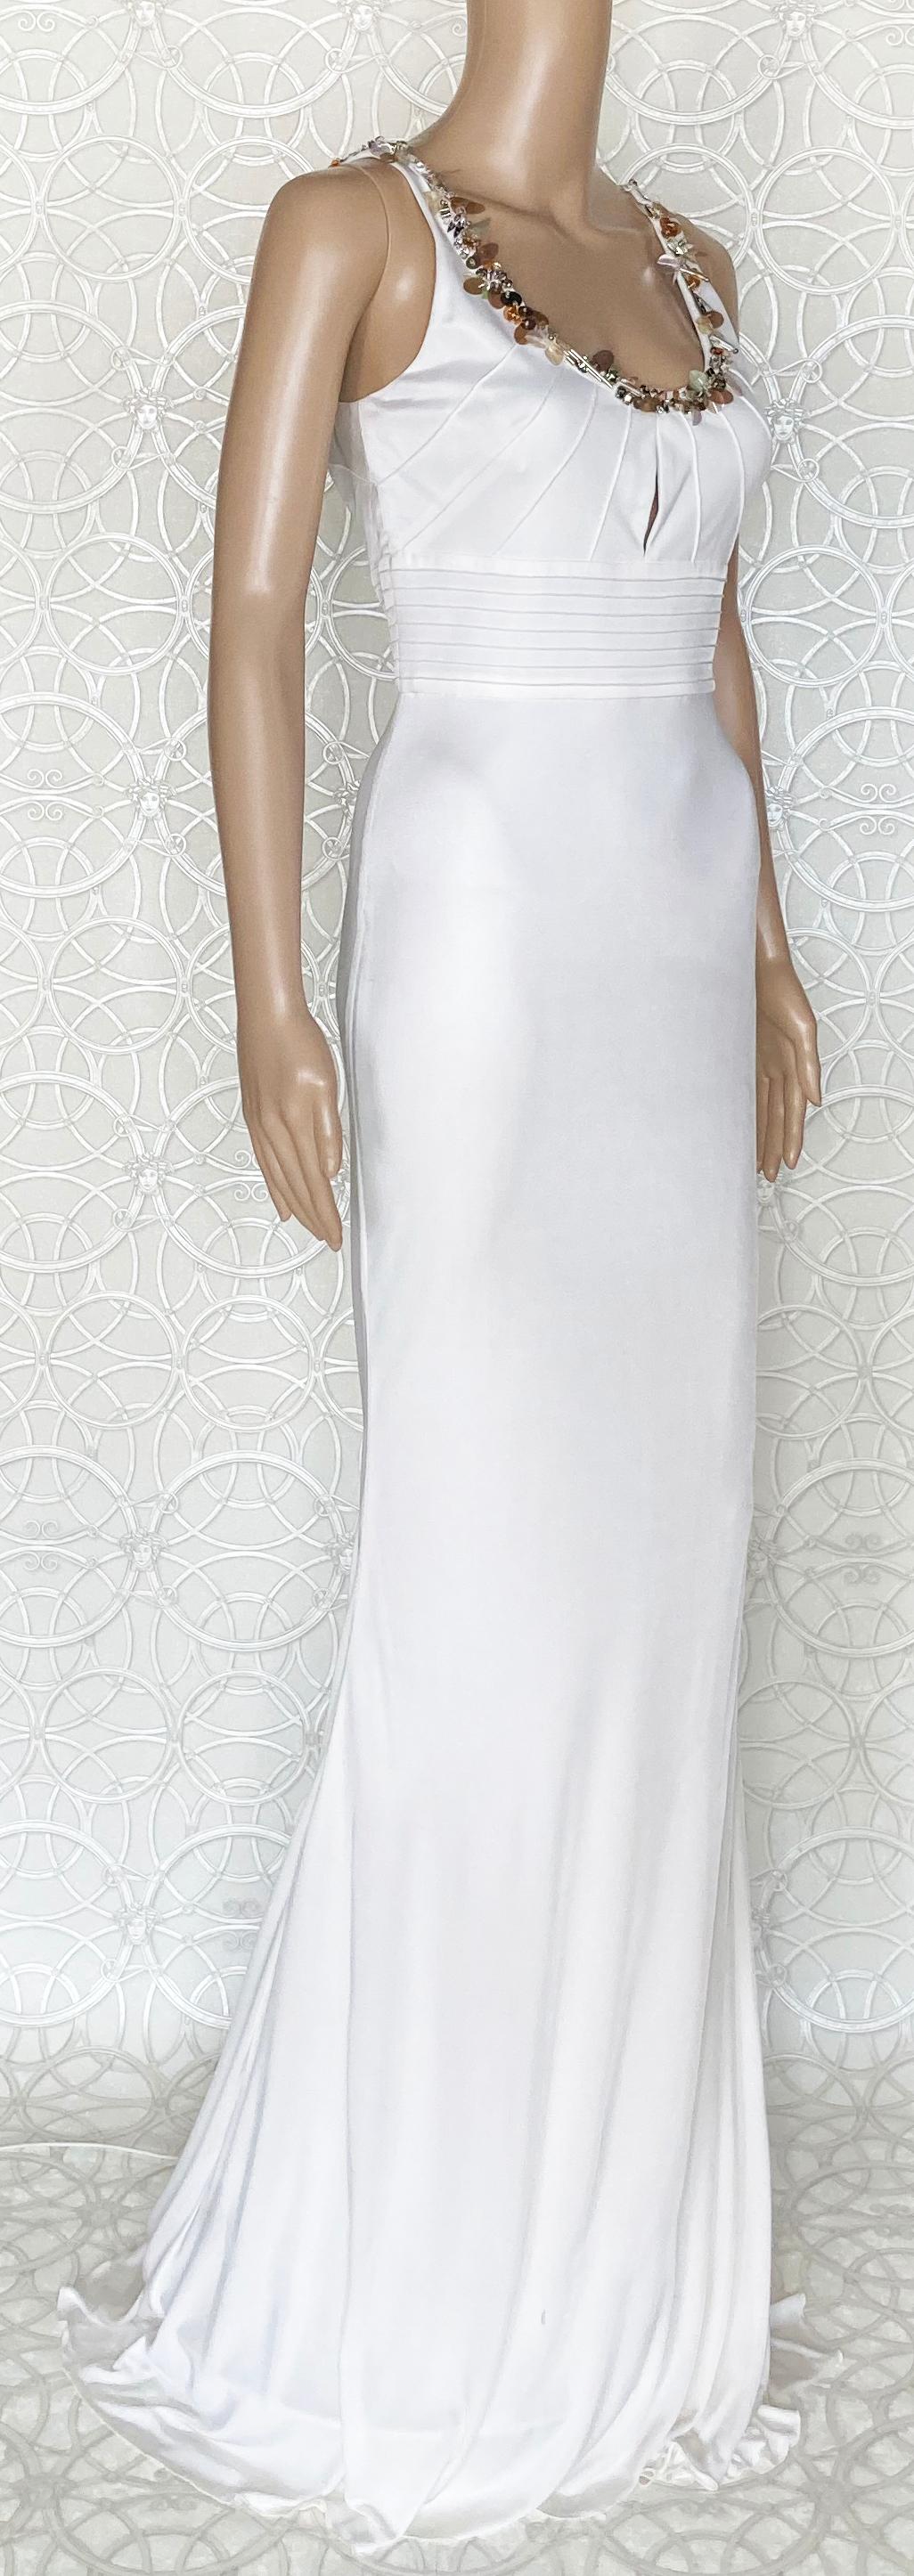 NEW VERSACE CRYSTAL EMBELLISHED WHITE LONG DRESS Gown  42 - 6 For Sale 8